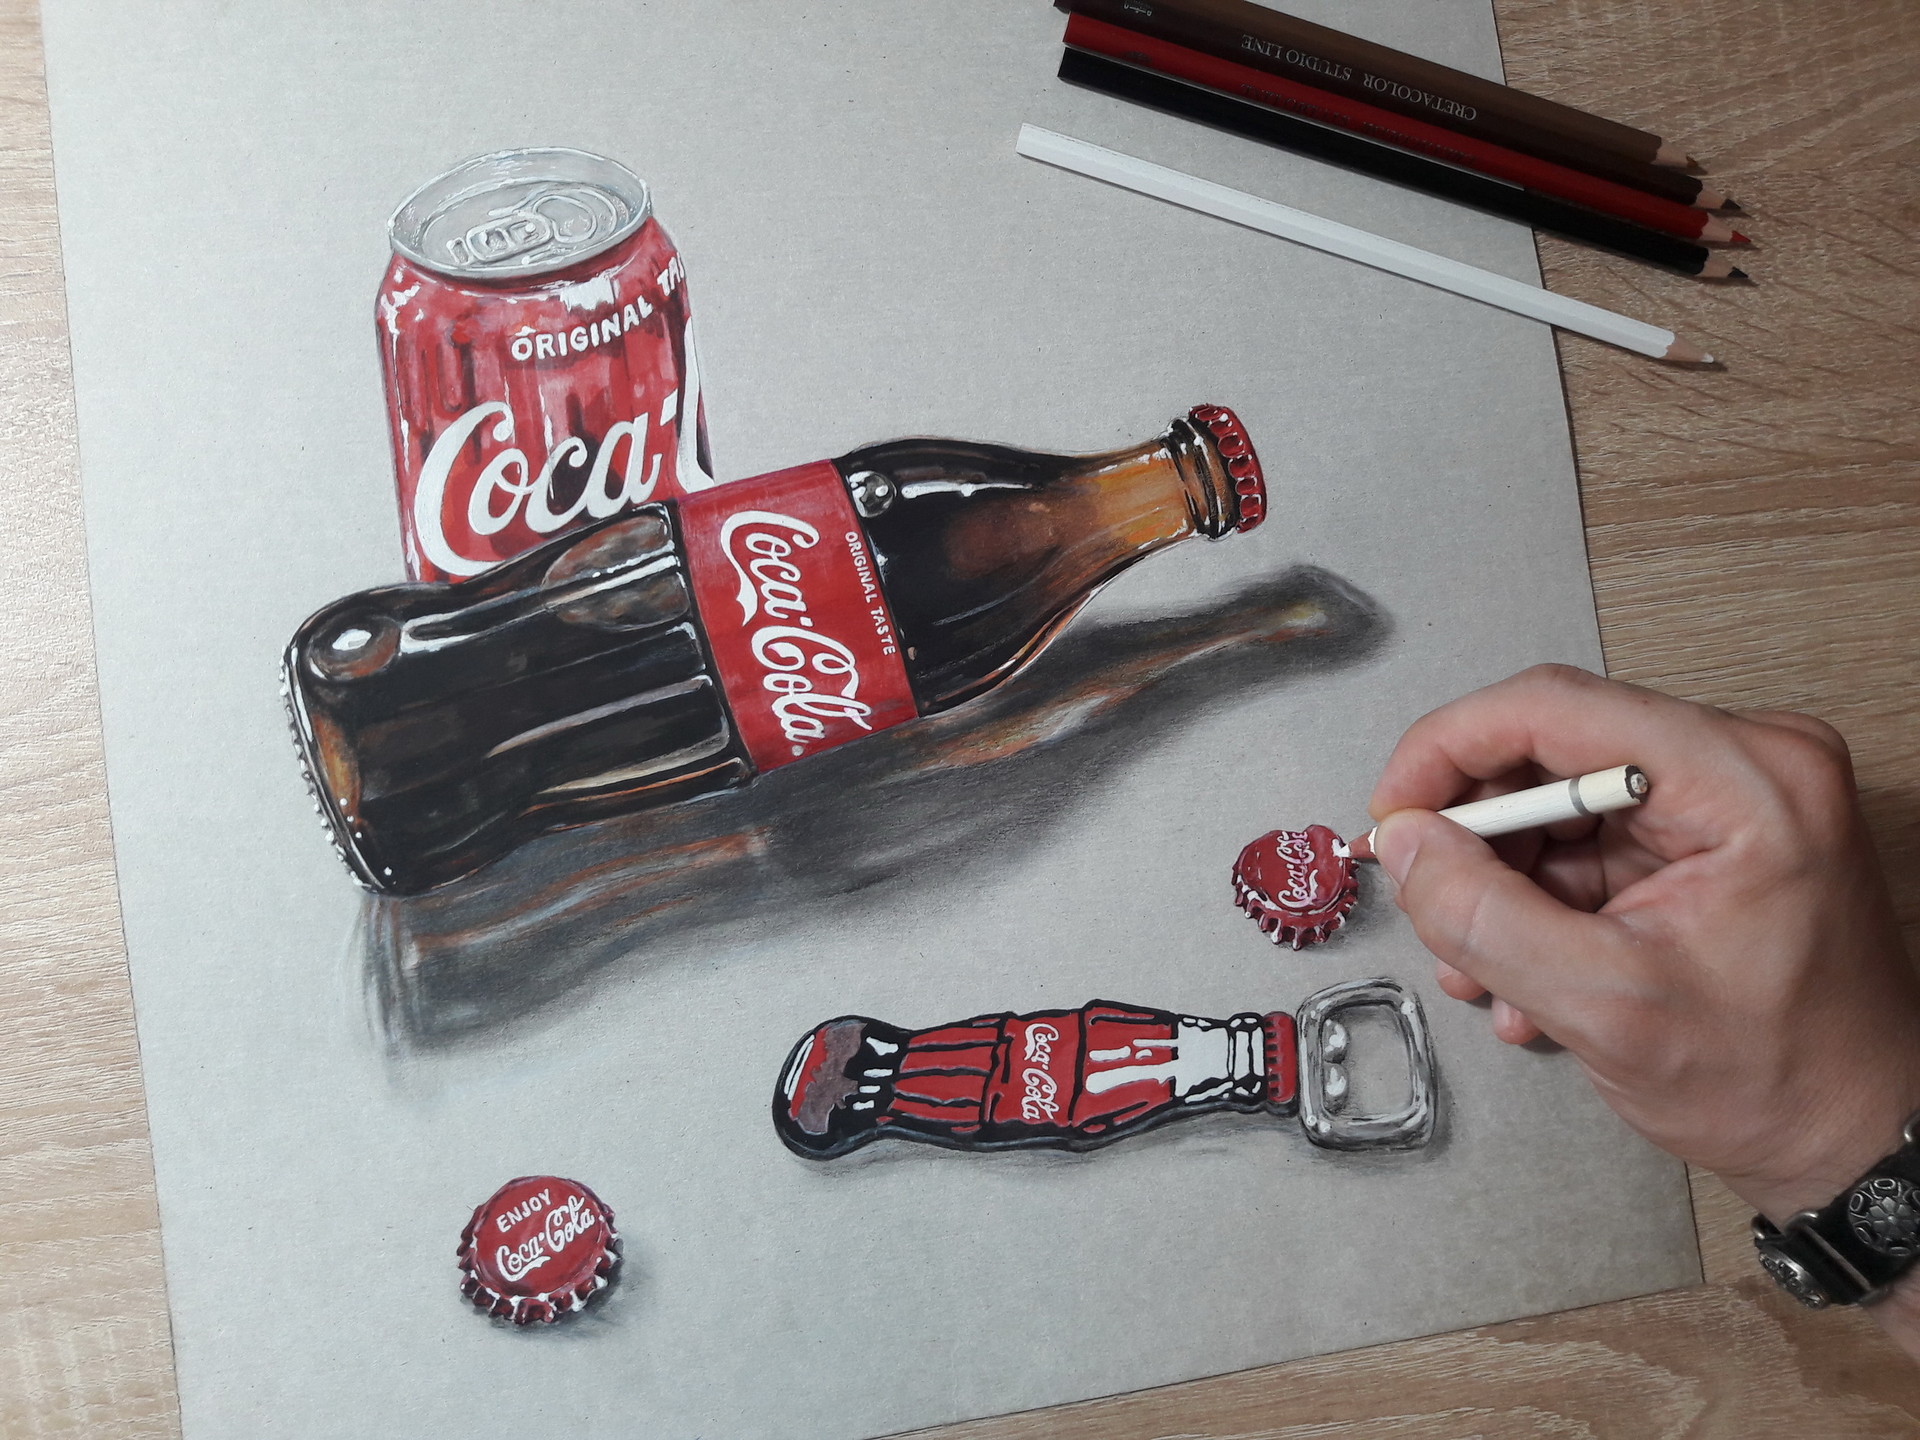 Coca Cola Bottle Drawing at GetDrawings | Free download